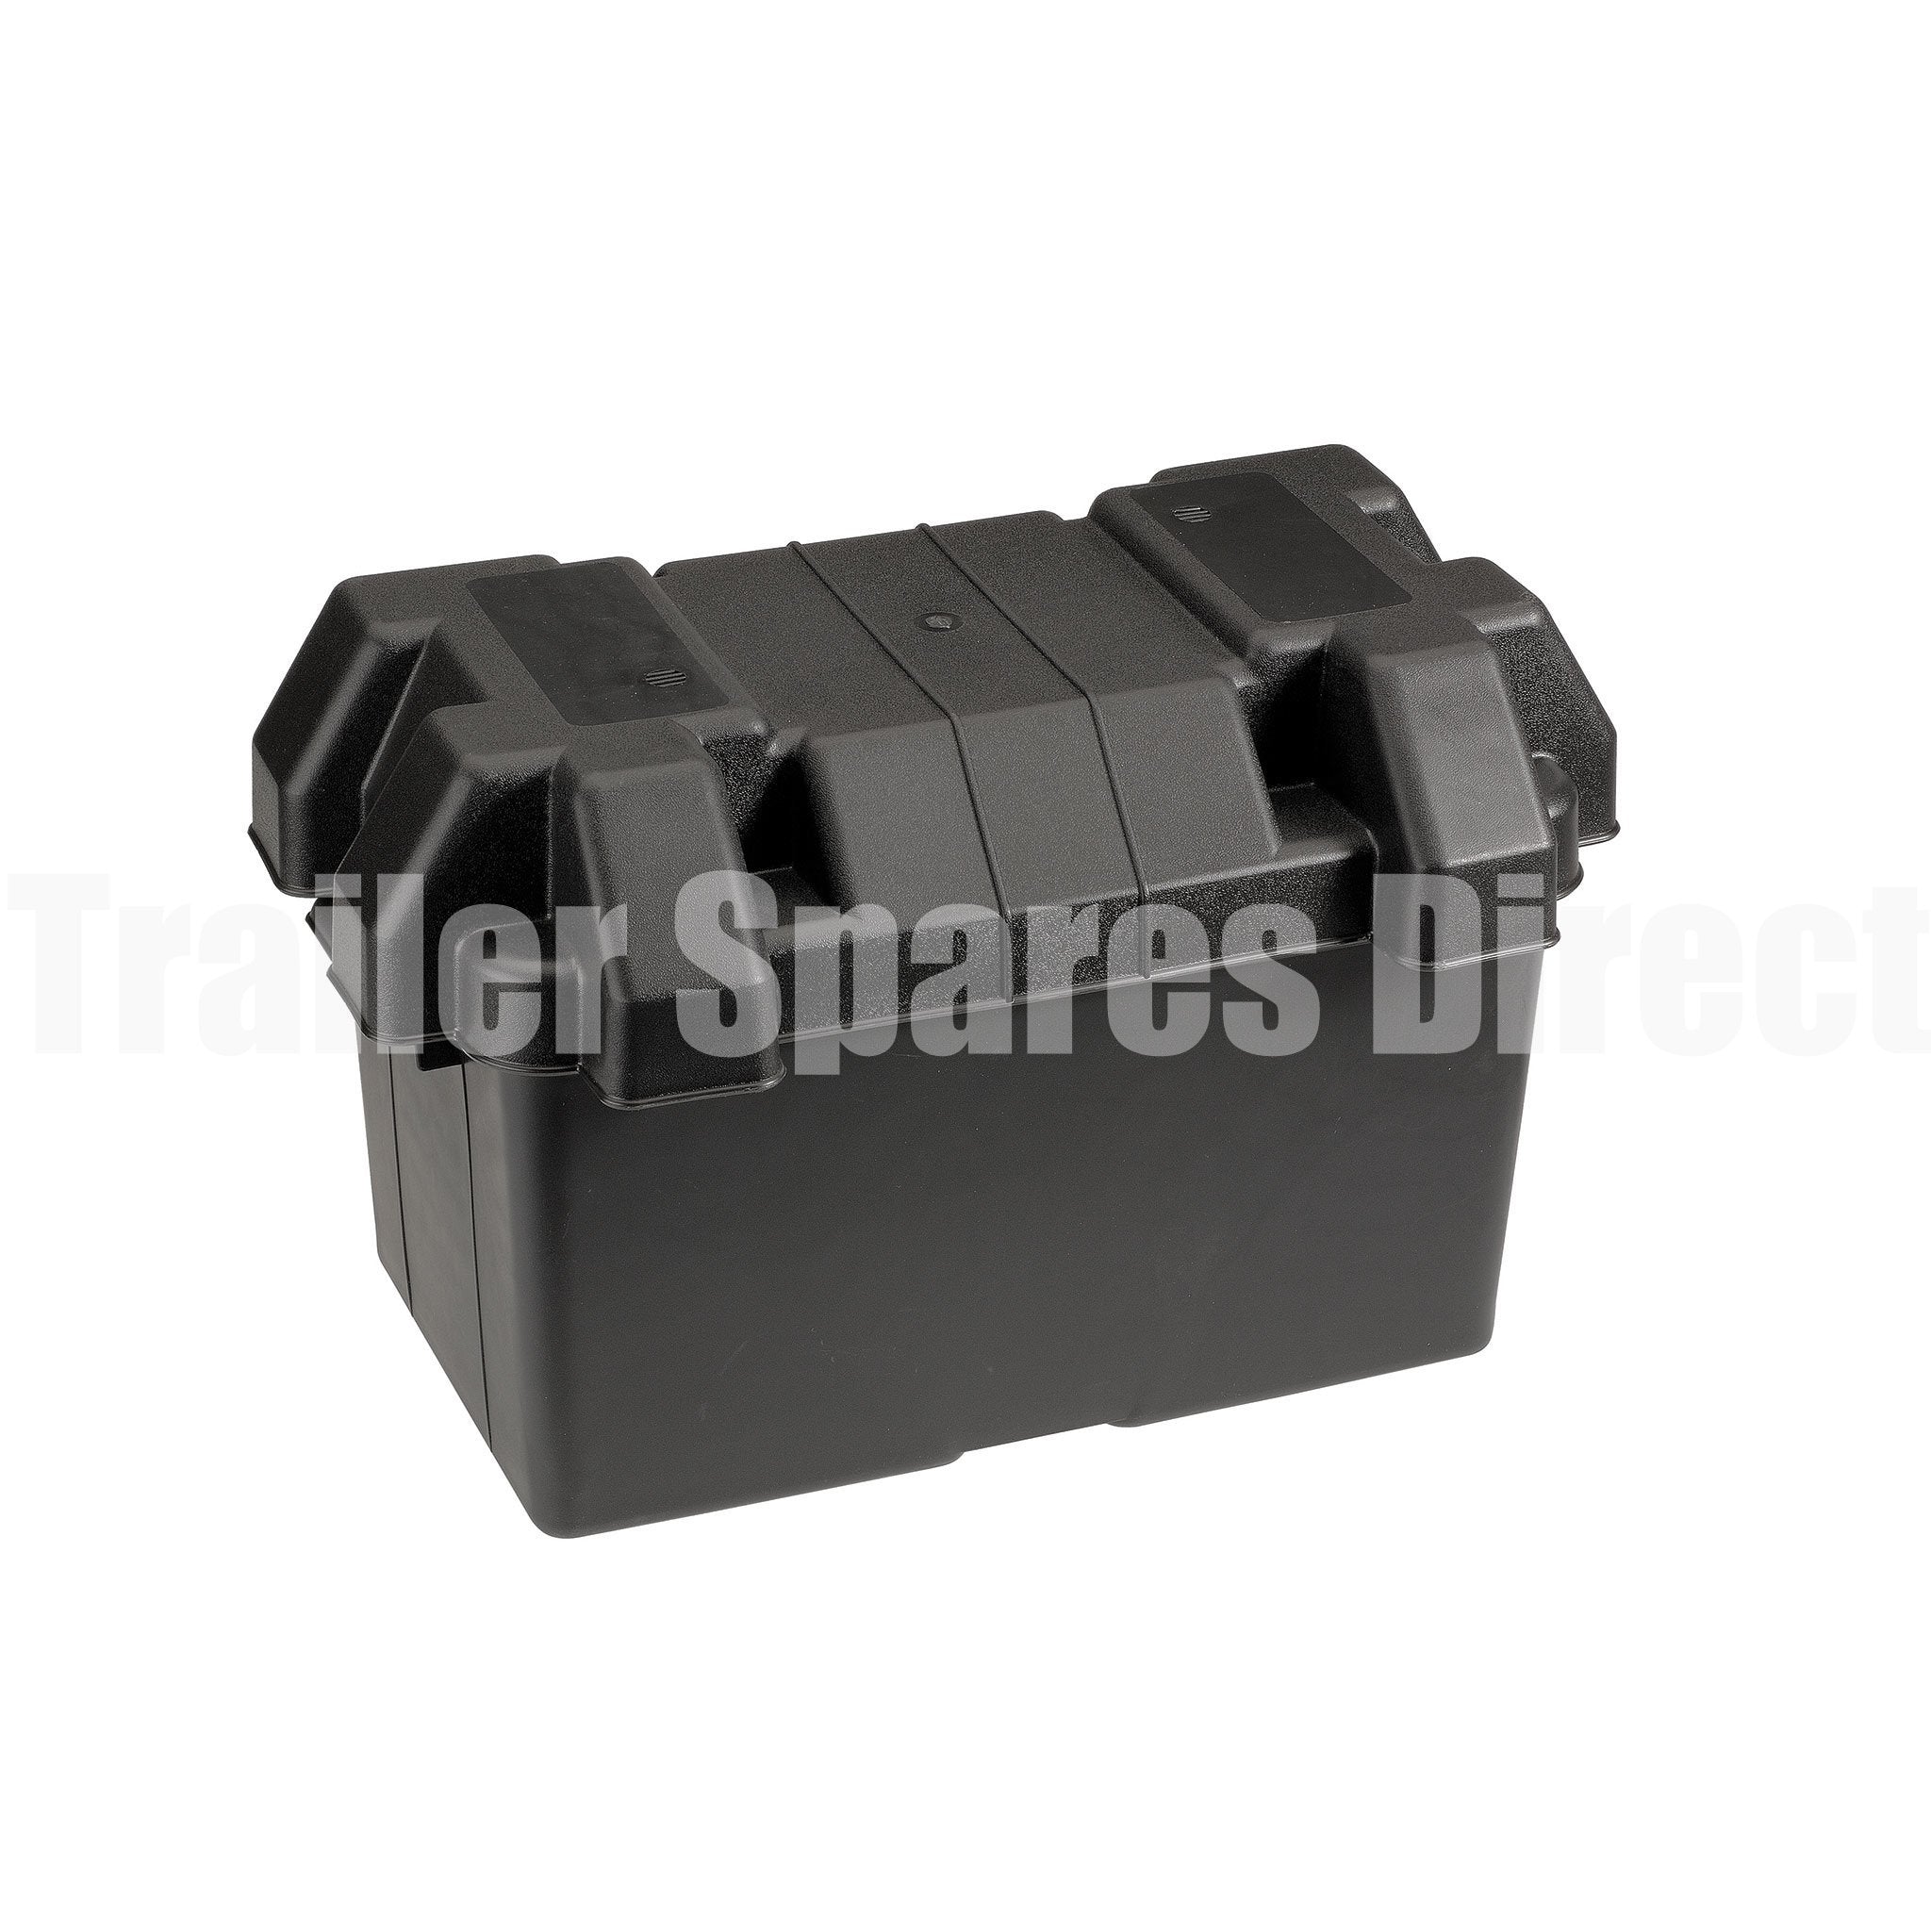 Large battery storage box for N70 size batteries. Safe secure storage on your trailer